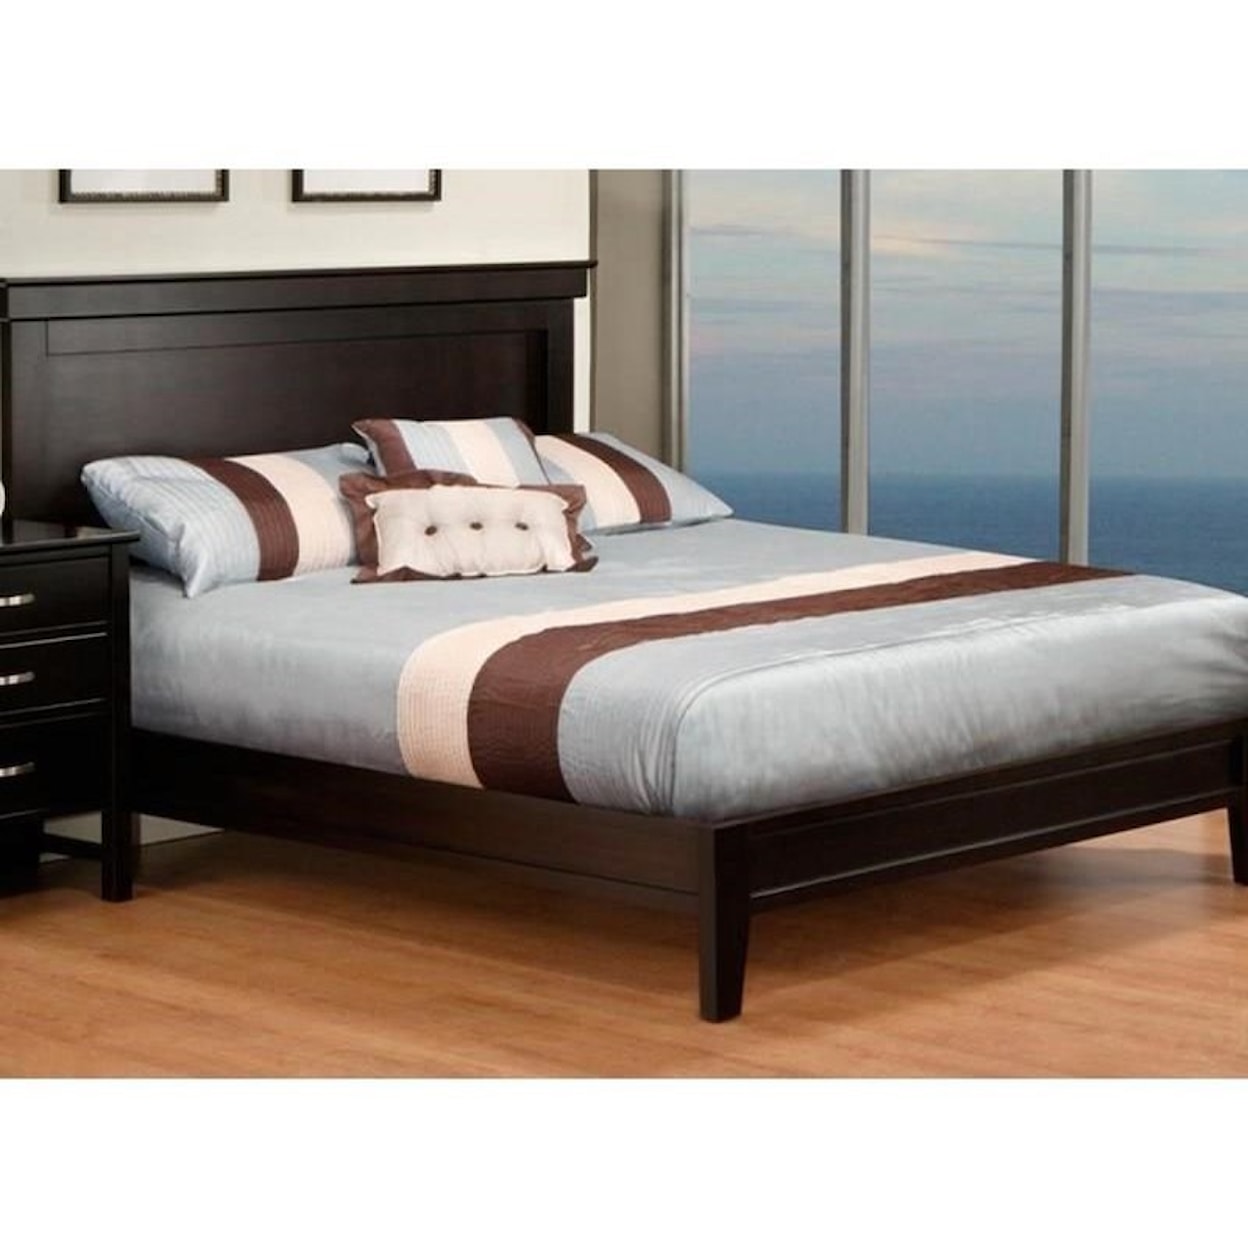 Handstone Brooklyn King Bed With Wraparound Footboard